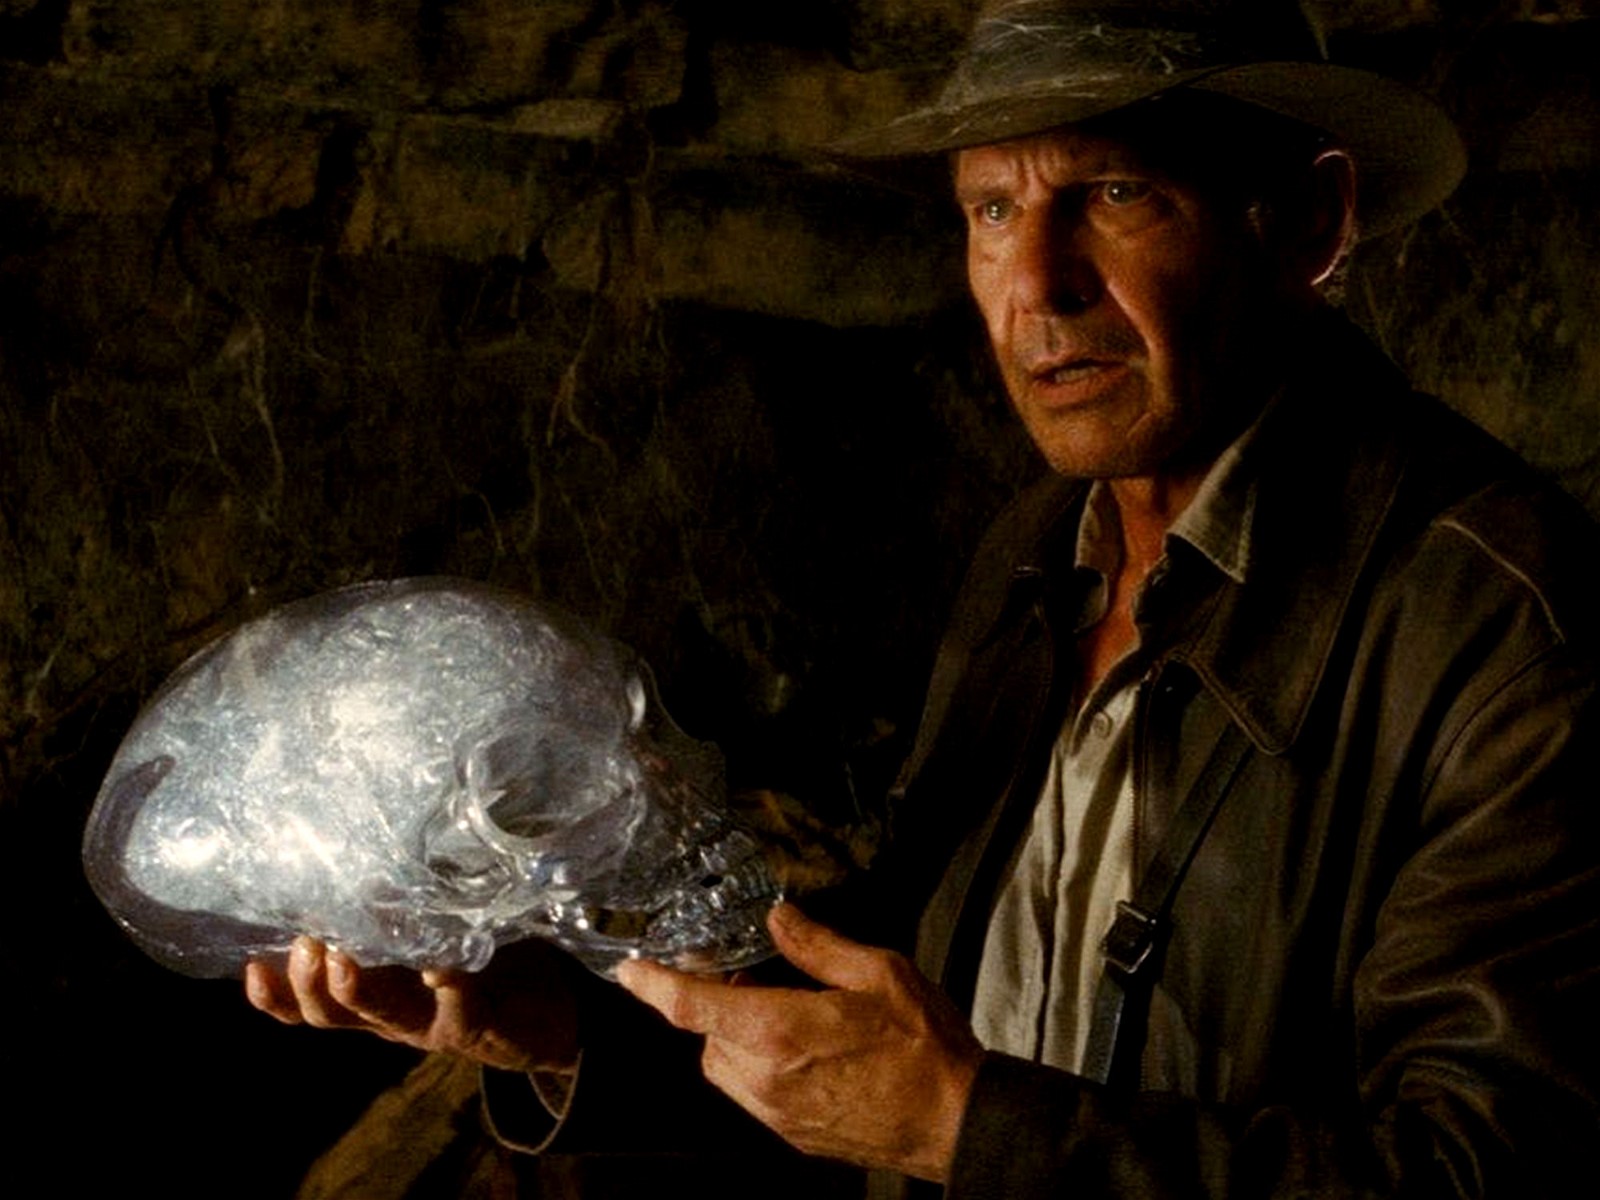 Harrison Ford in Indiana Jones and The Kingdom of the Crystal Skulls